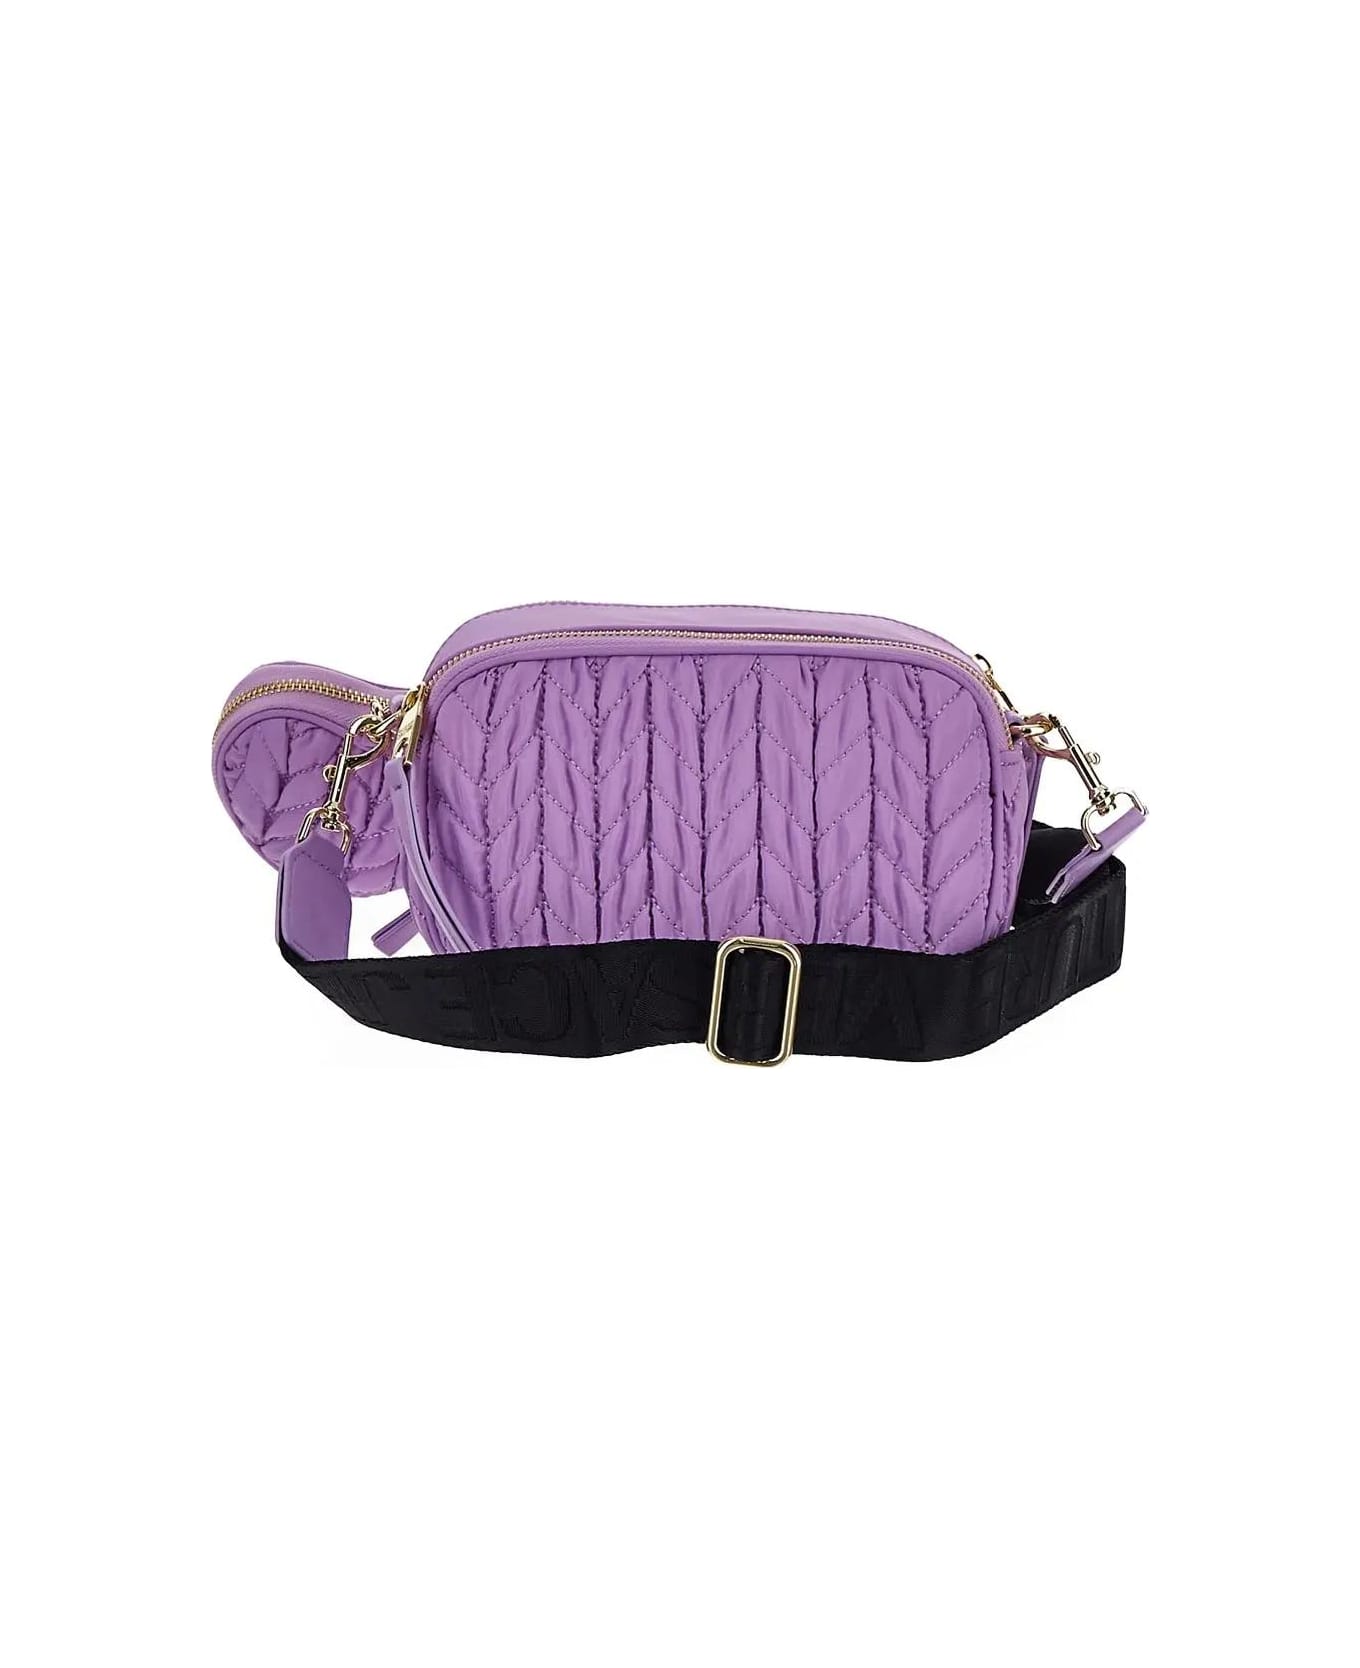 Versace Jeans Couture Bag - PURPLE ショルダーバッグ